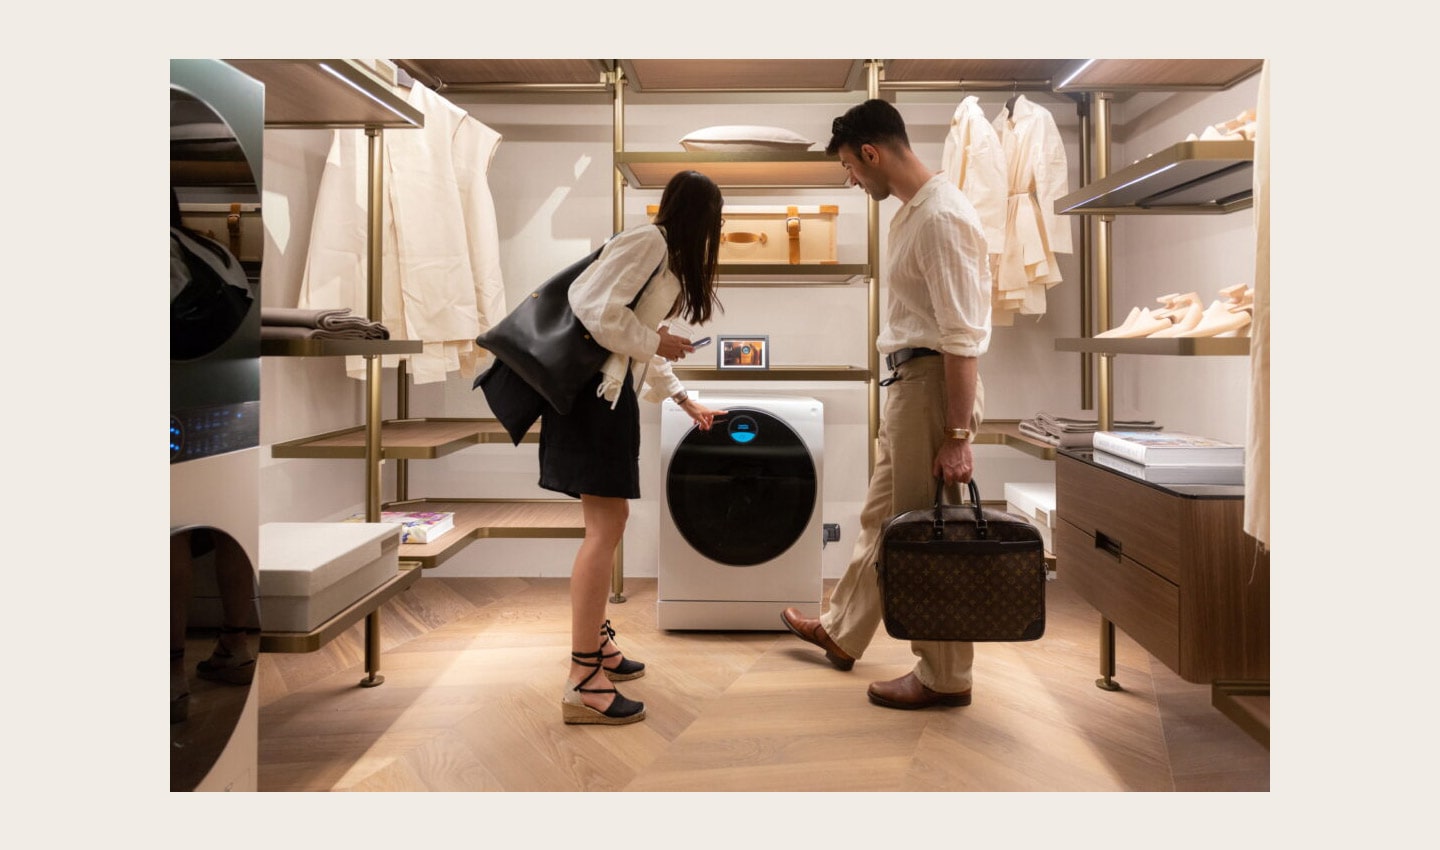 Two visitors taking a closer look at LG washer during Milan Design Week 2022